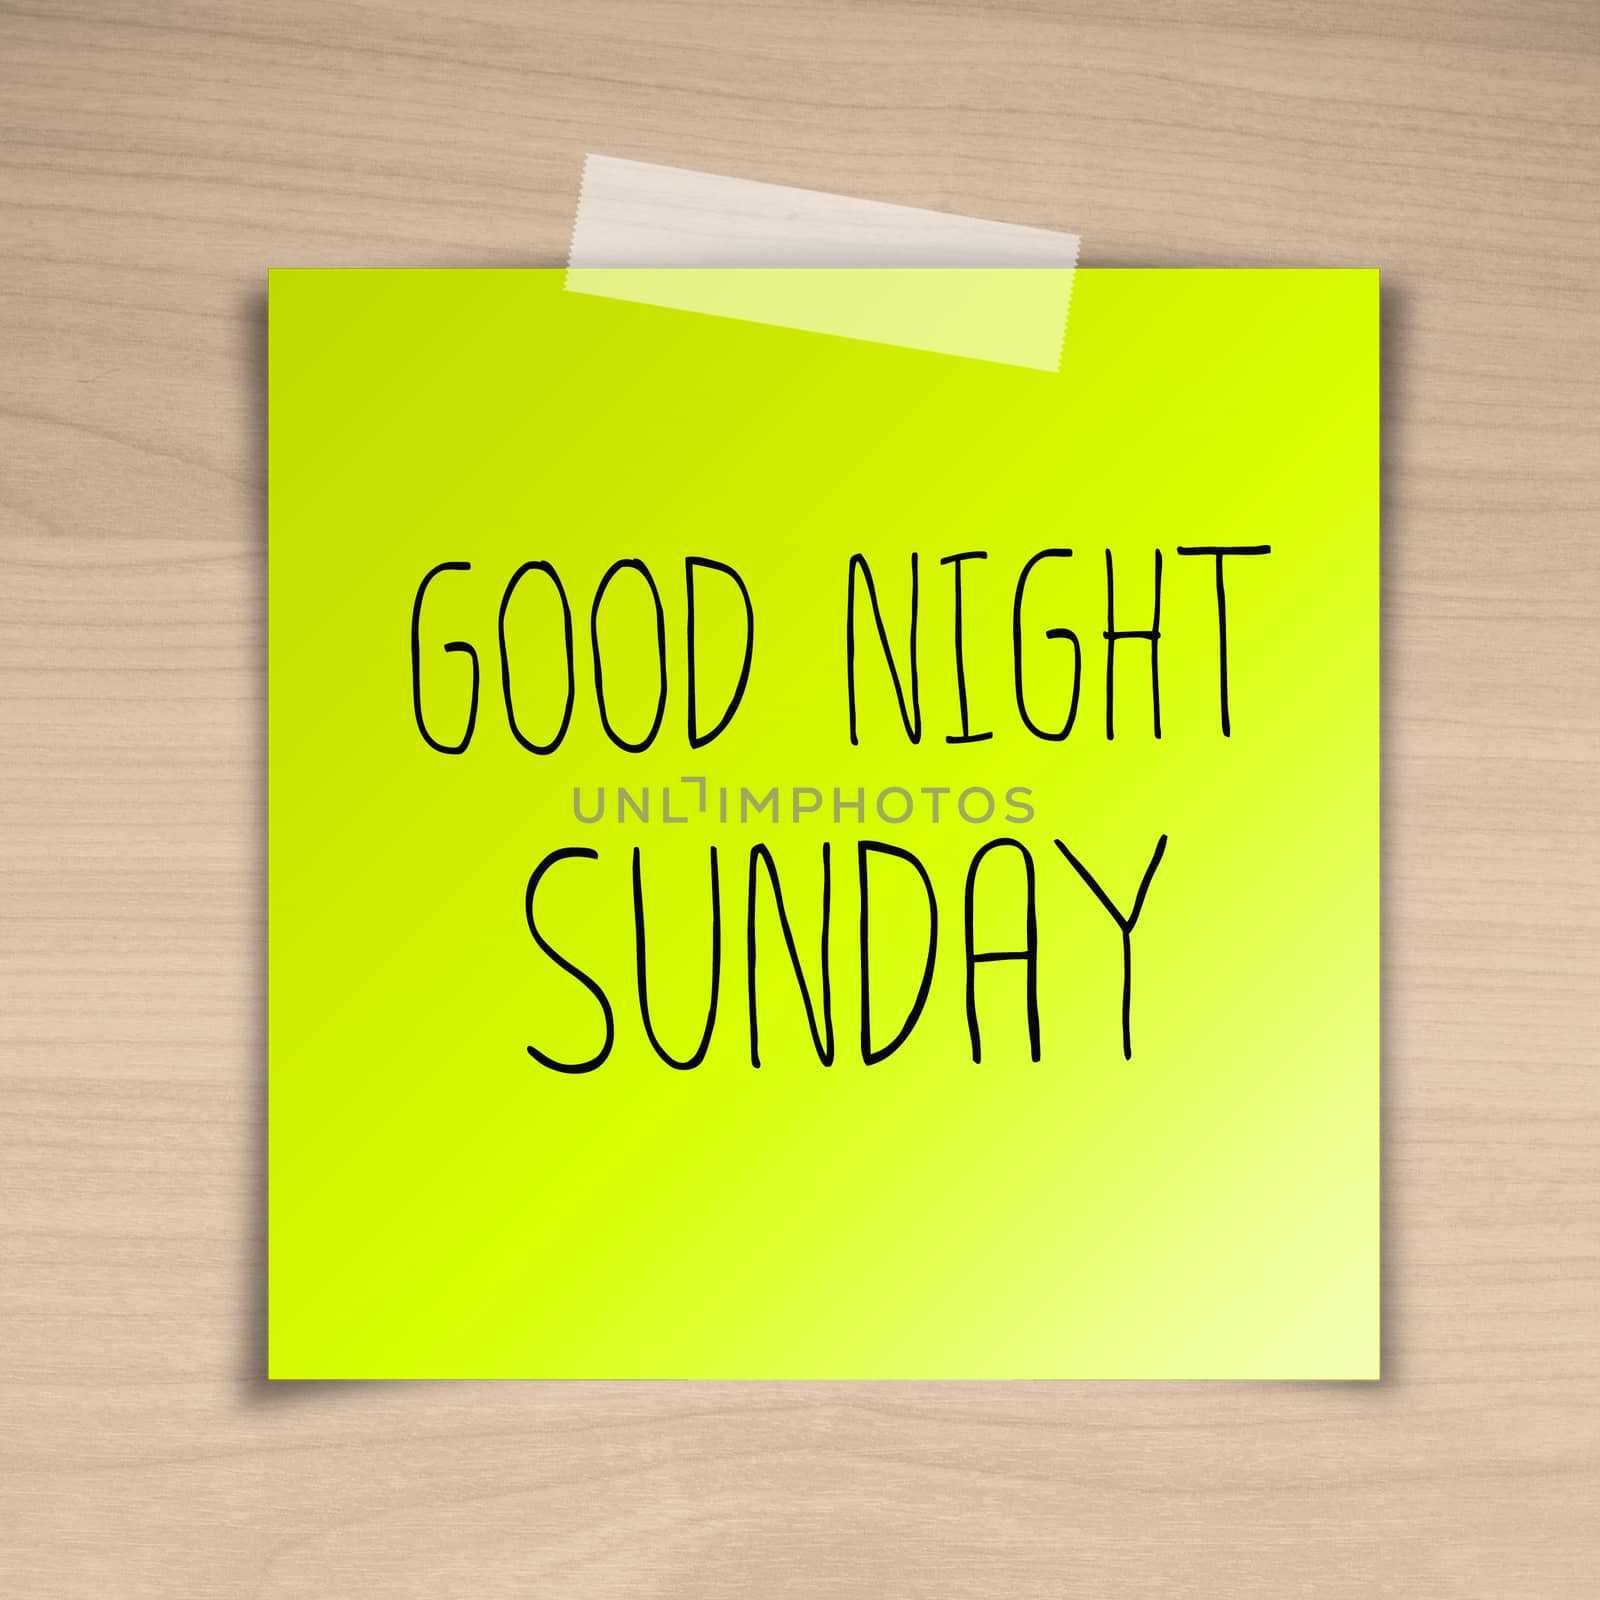 Good night sunday sticky paper on brown wood background texture